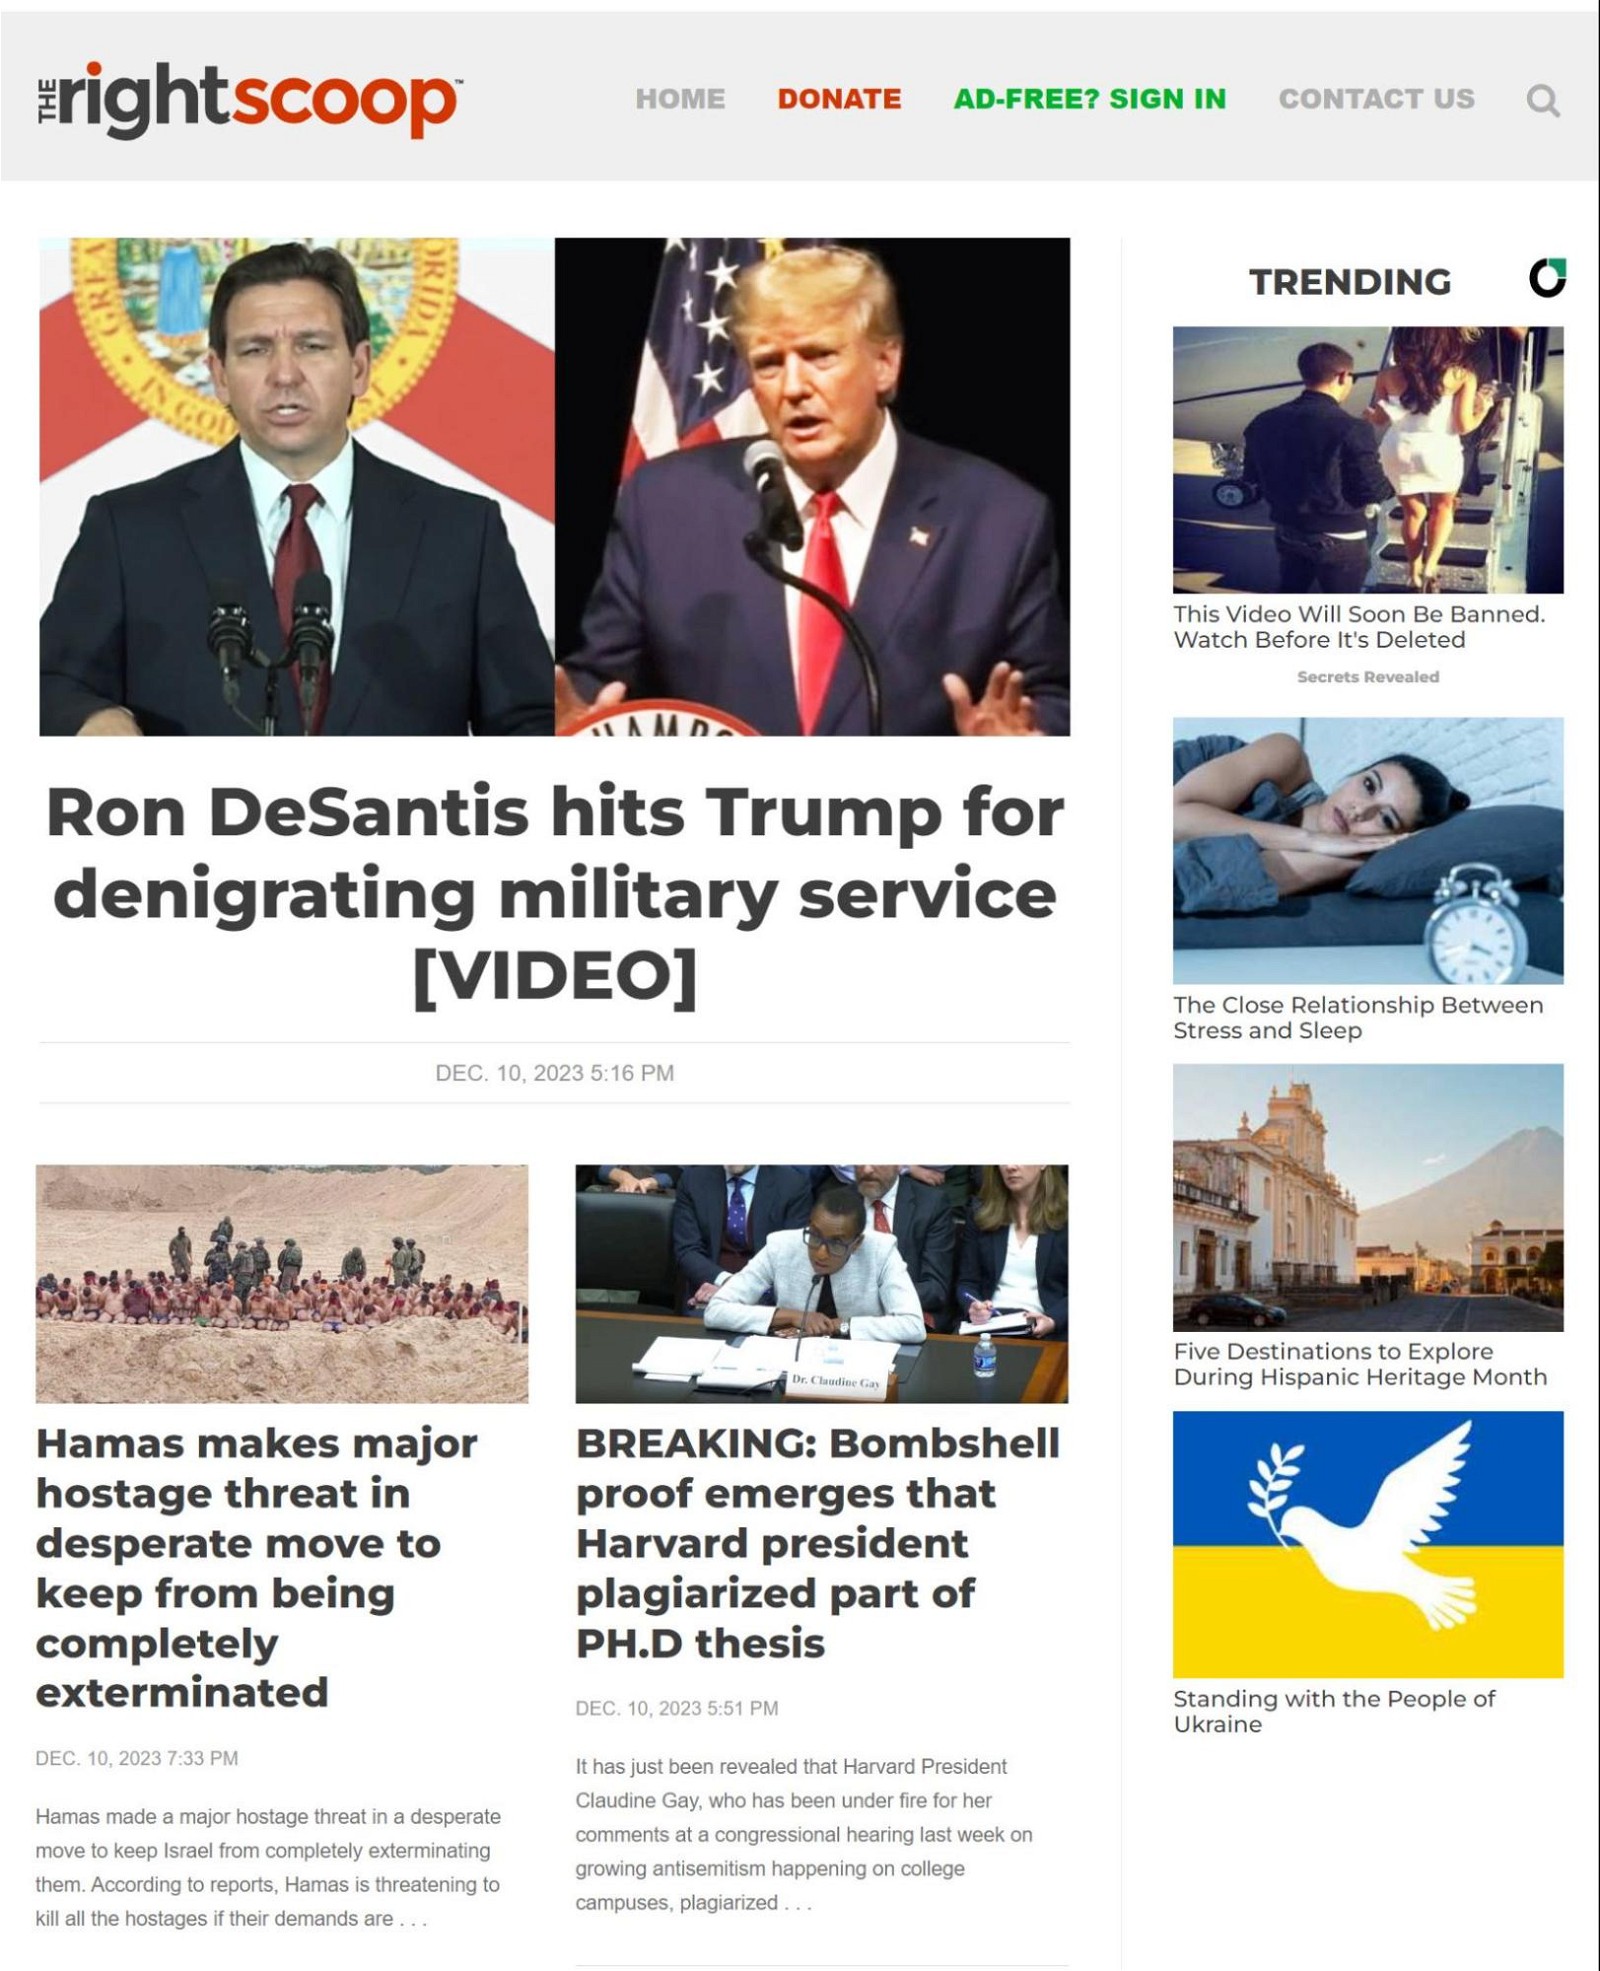 The Right Scoop homepage